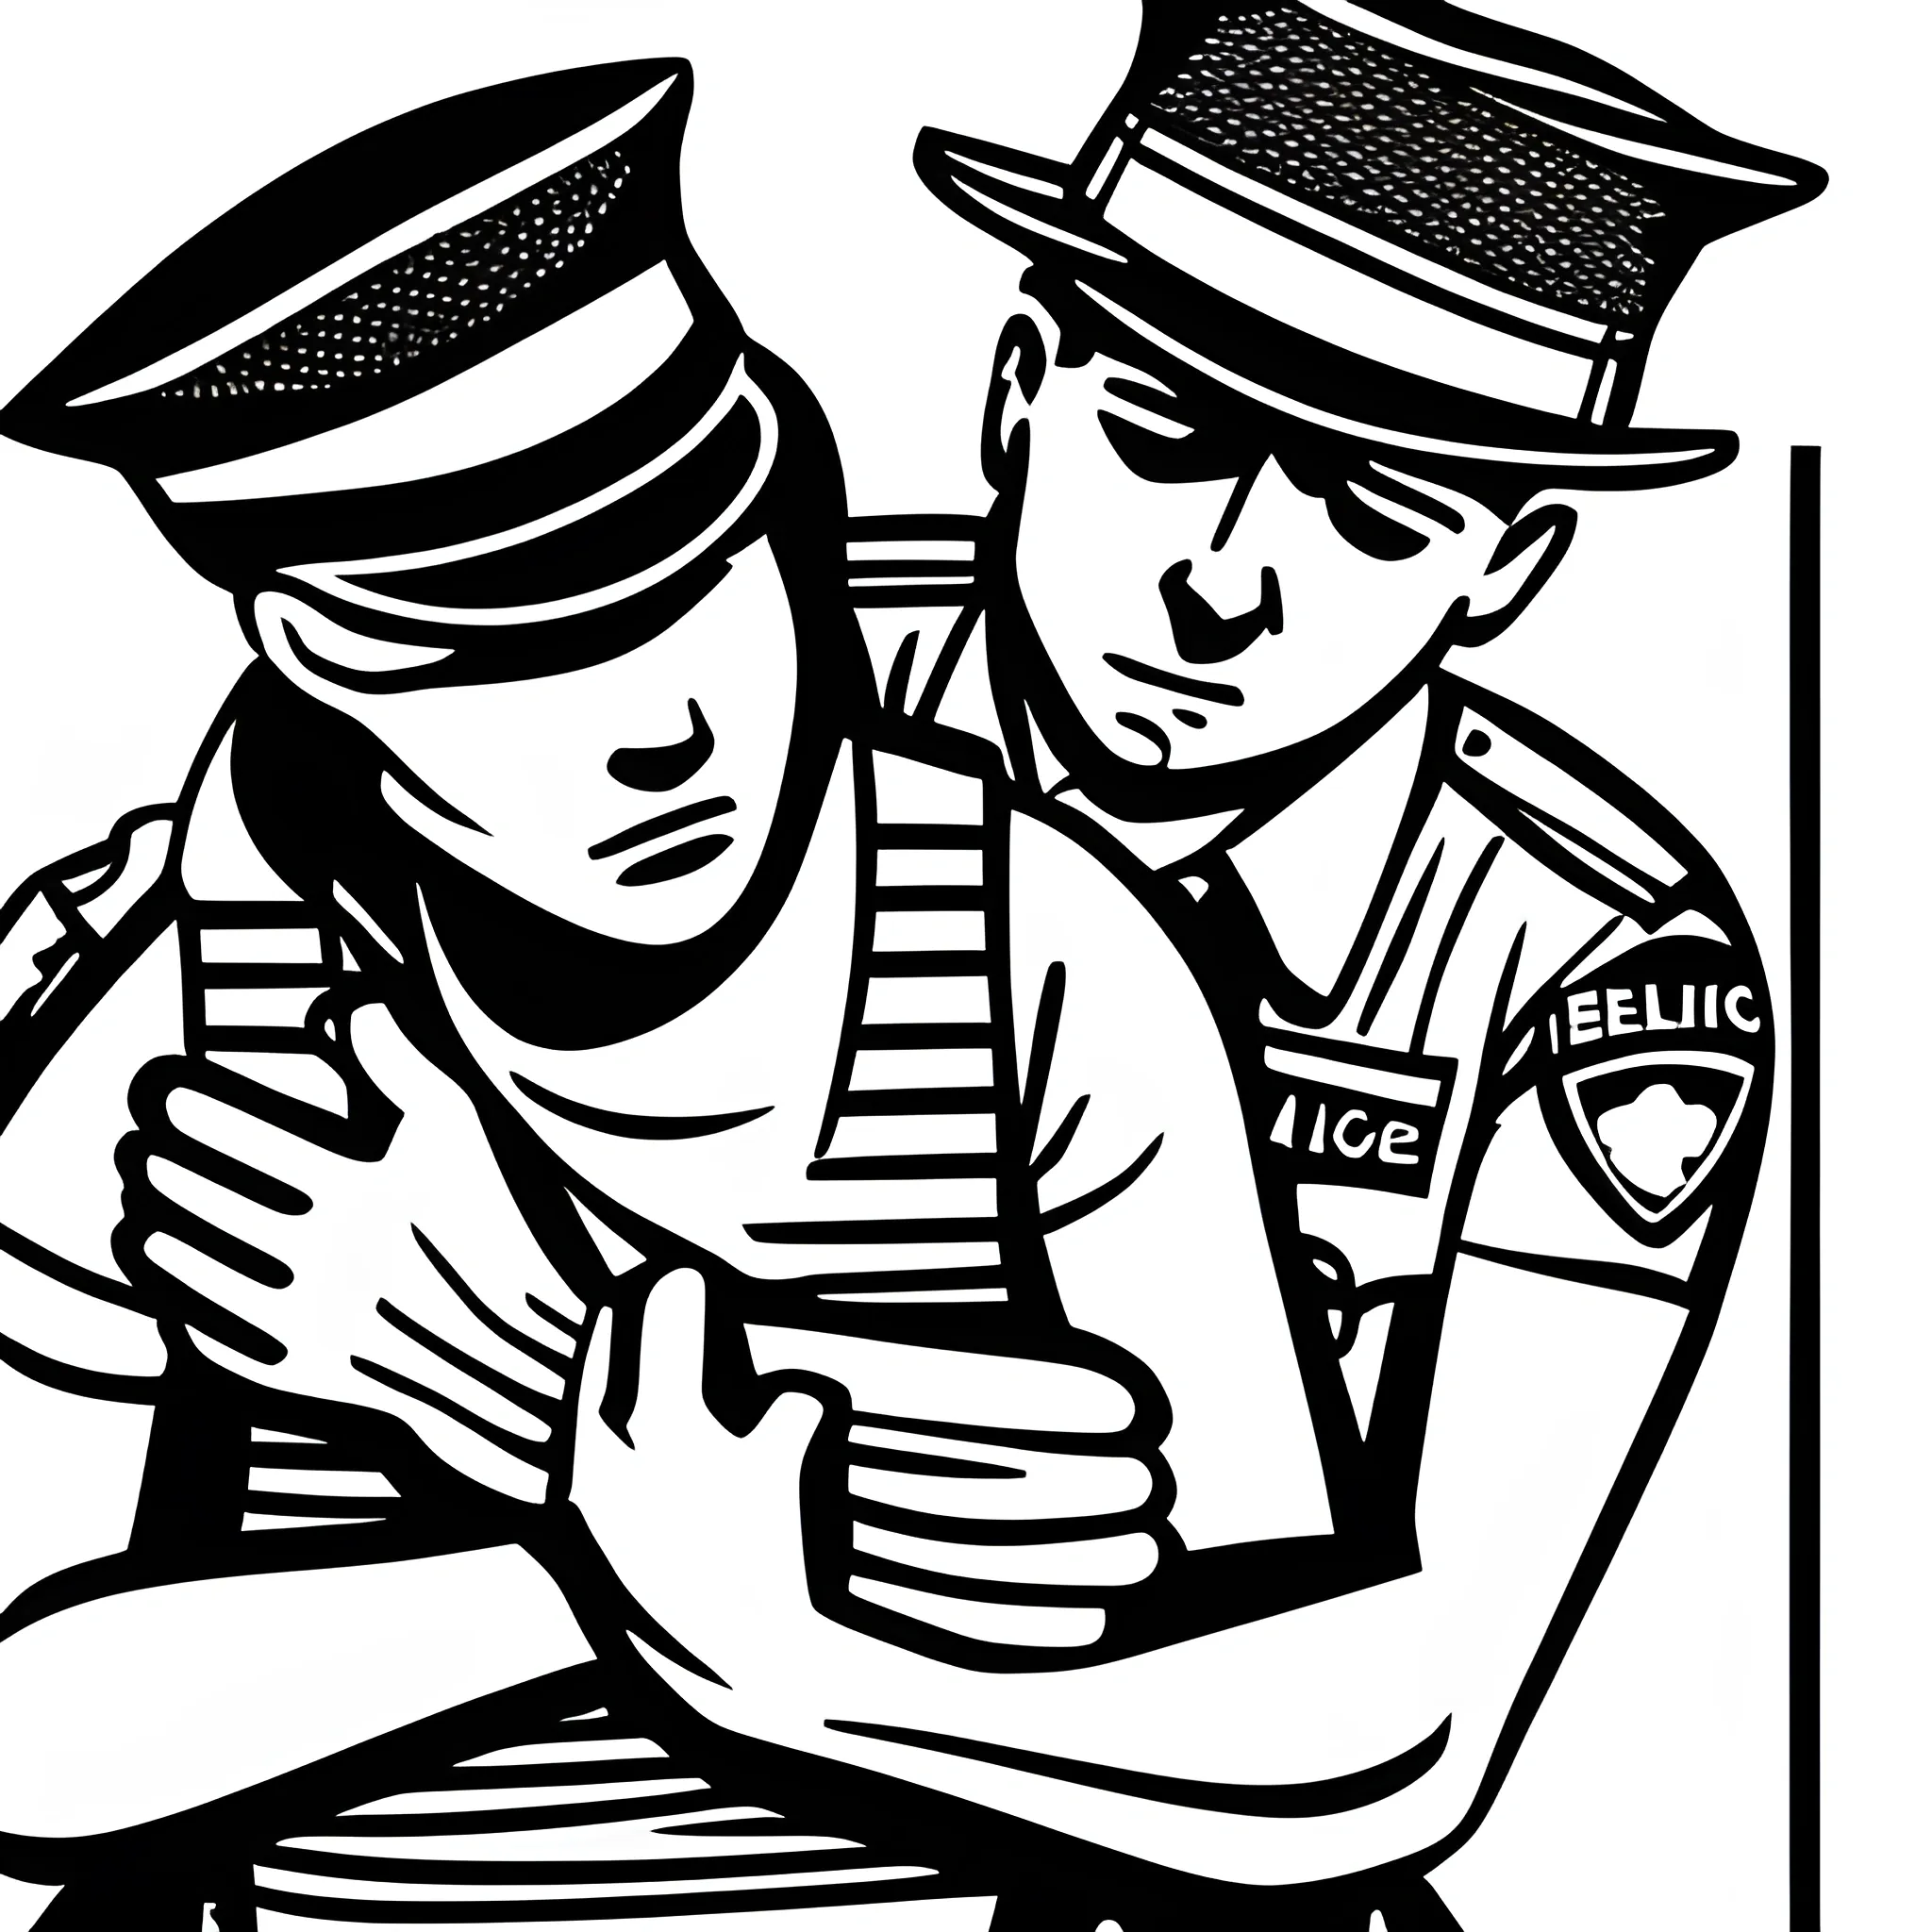 Illustration of being detained by the police